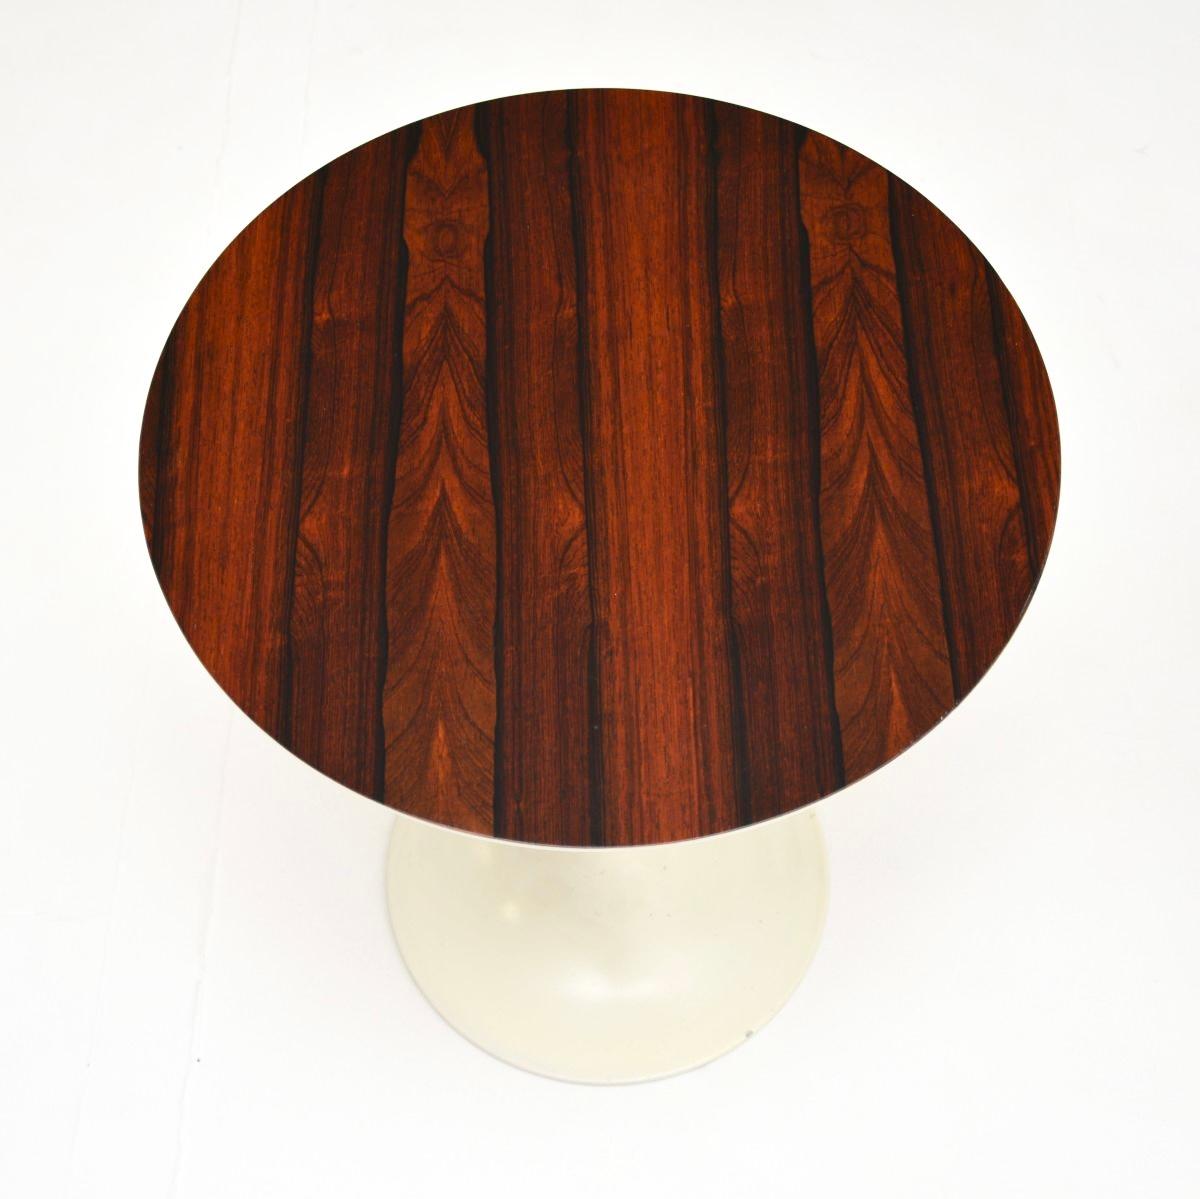 British Pair of Vintage Rosewood Tulip Side Tables by Arkana For Sale